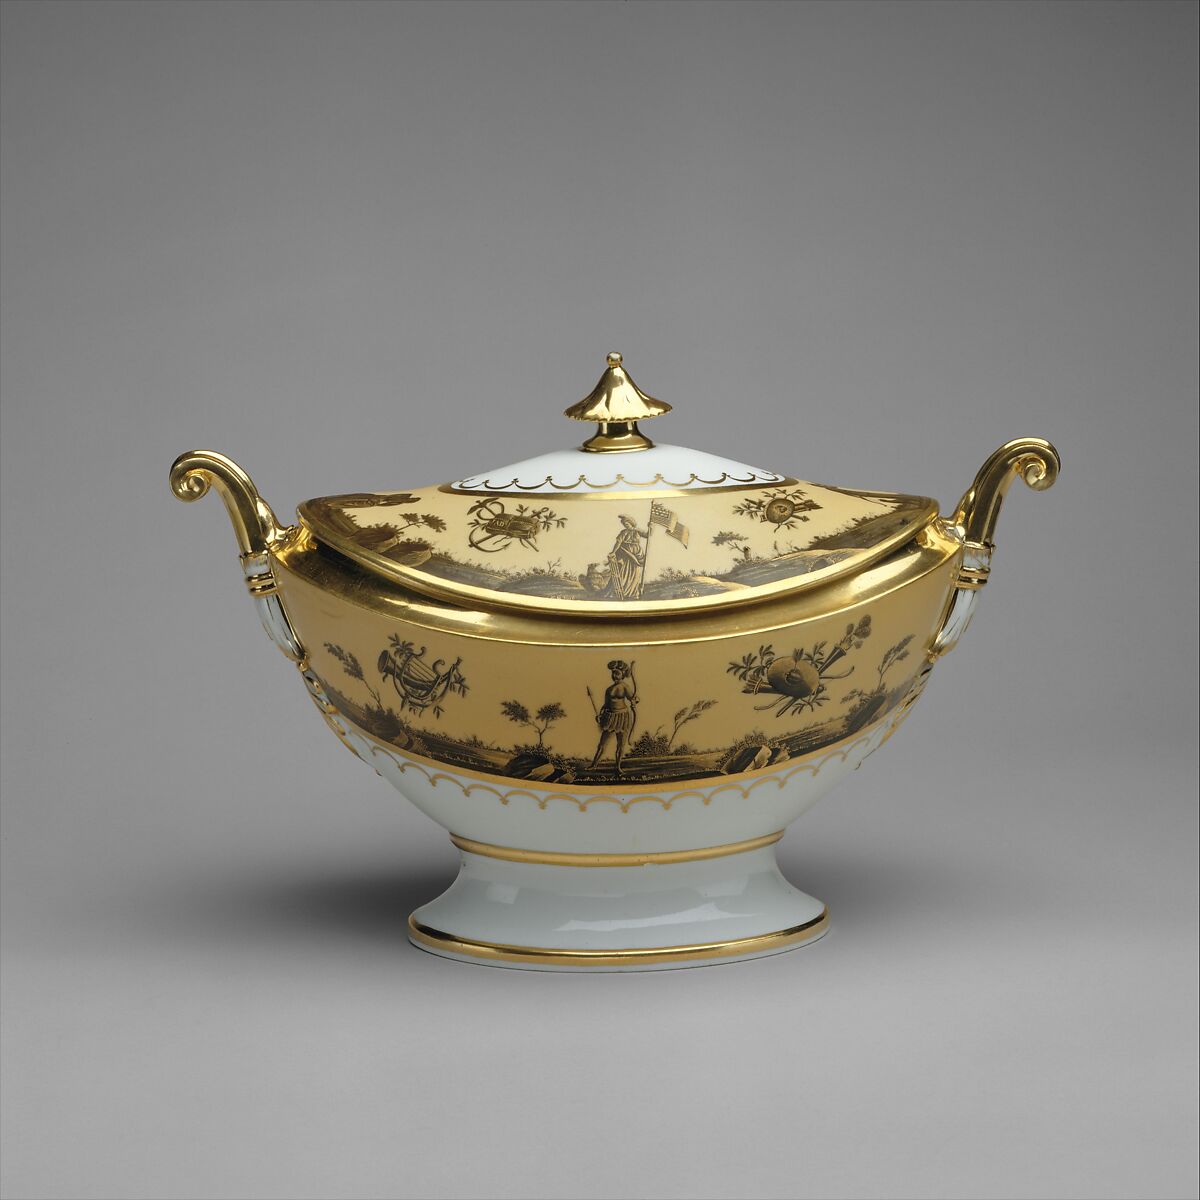 Covered tureen, Attributed to Dihl et Guérhard (French, 1781–ca. 1824), Porcelain, French, for American market 